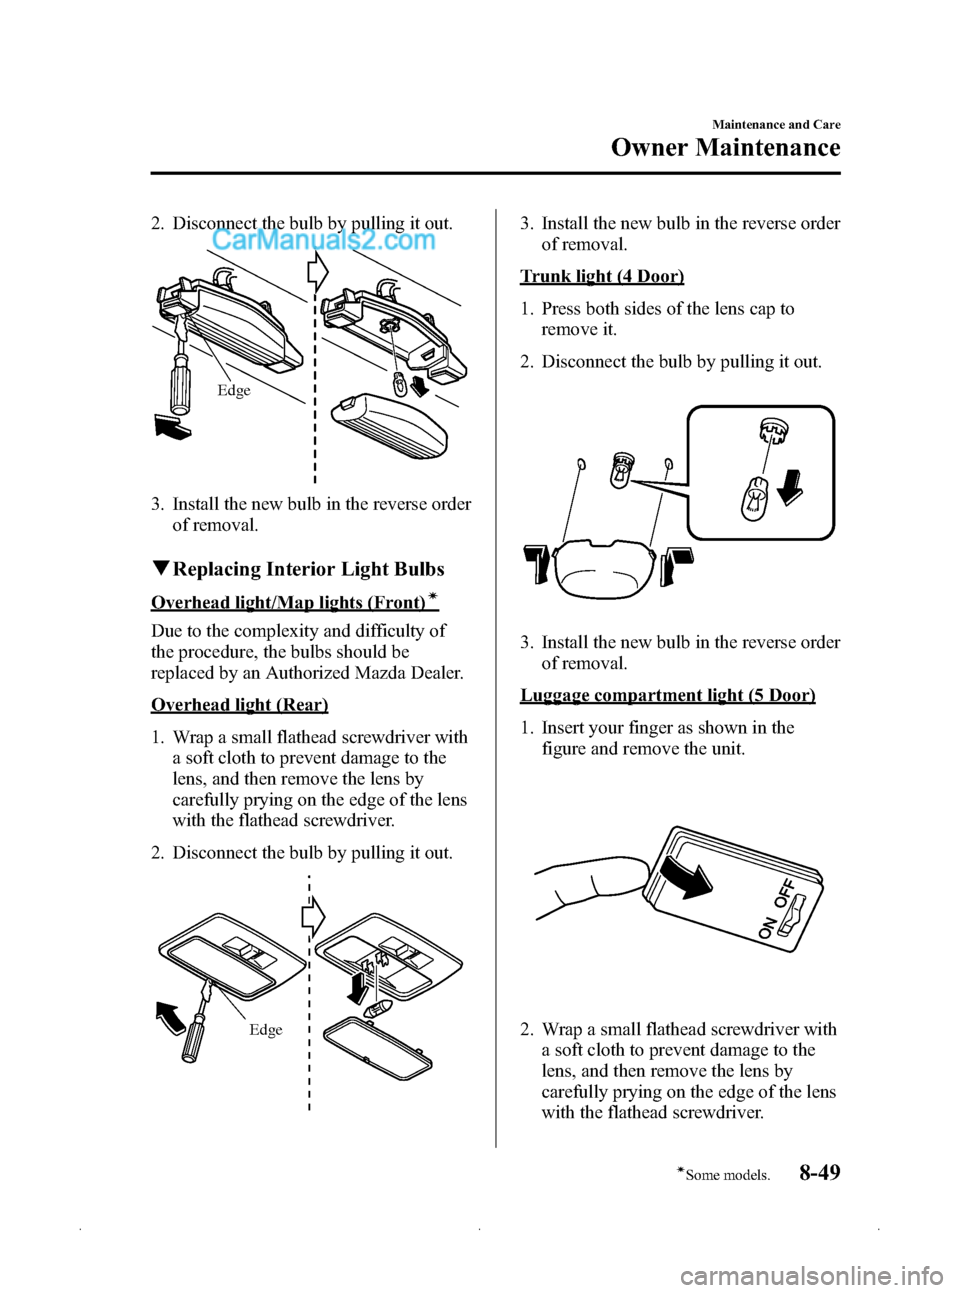 MAZDA MODEL MAZDASPEED 3 2009  Owners Manual (in English) Black plate (335,1)
2. Disconnect the bulb by pulling it out.
Edge
3. Install the new bulb in the reverse orderof removal.
qReplacing Interior Light Bulbs
Overhead light/Map lights (Front)í
Due to th